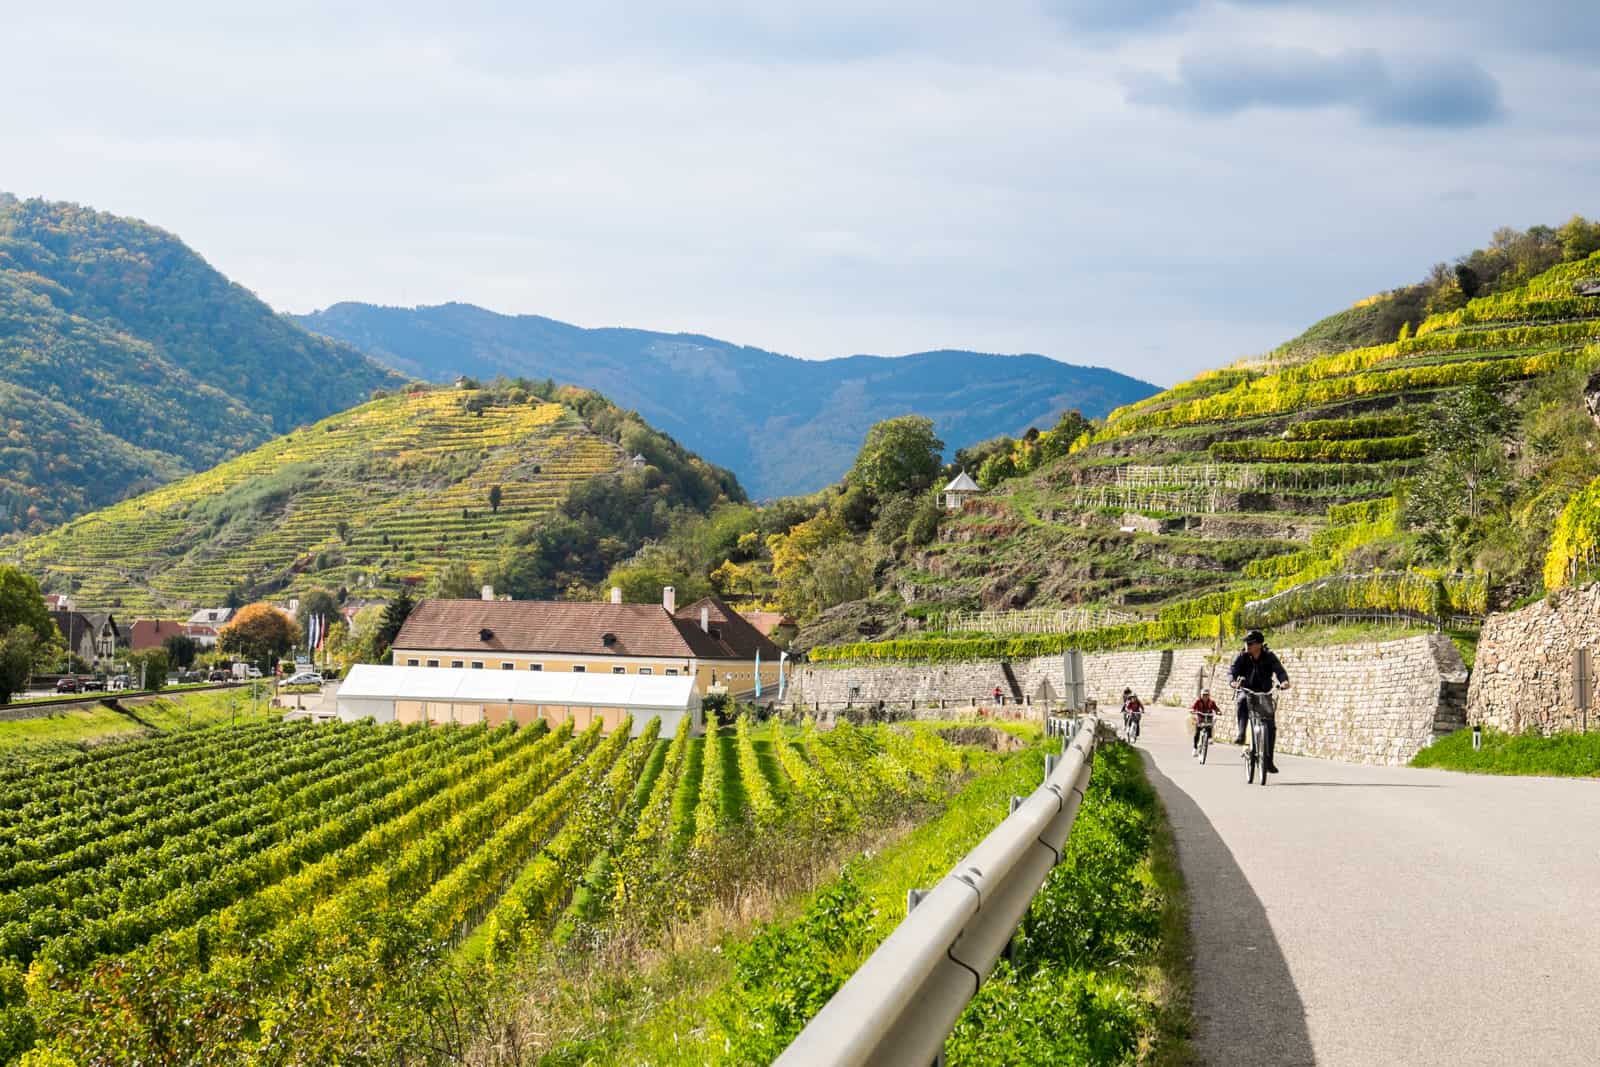 A man and two children cycle past bright green rows of wine vines on the Danube Bike Path in Wachau Austria